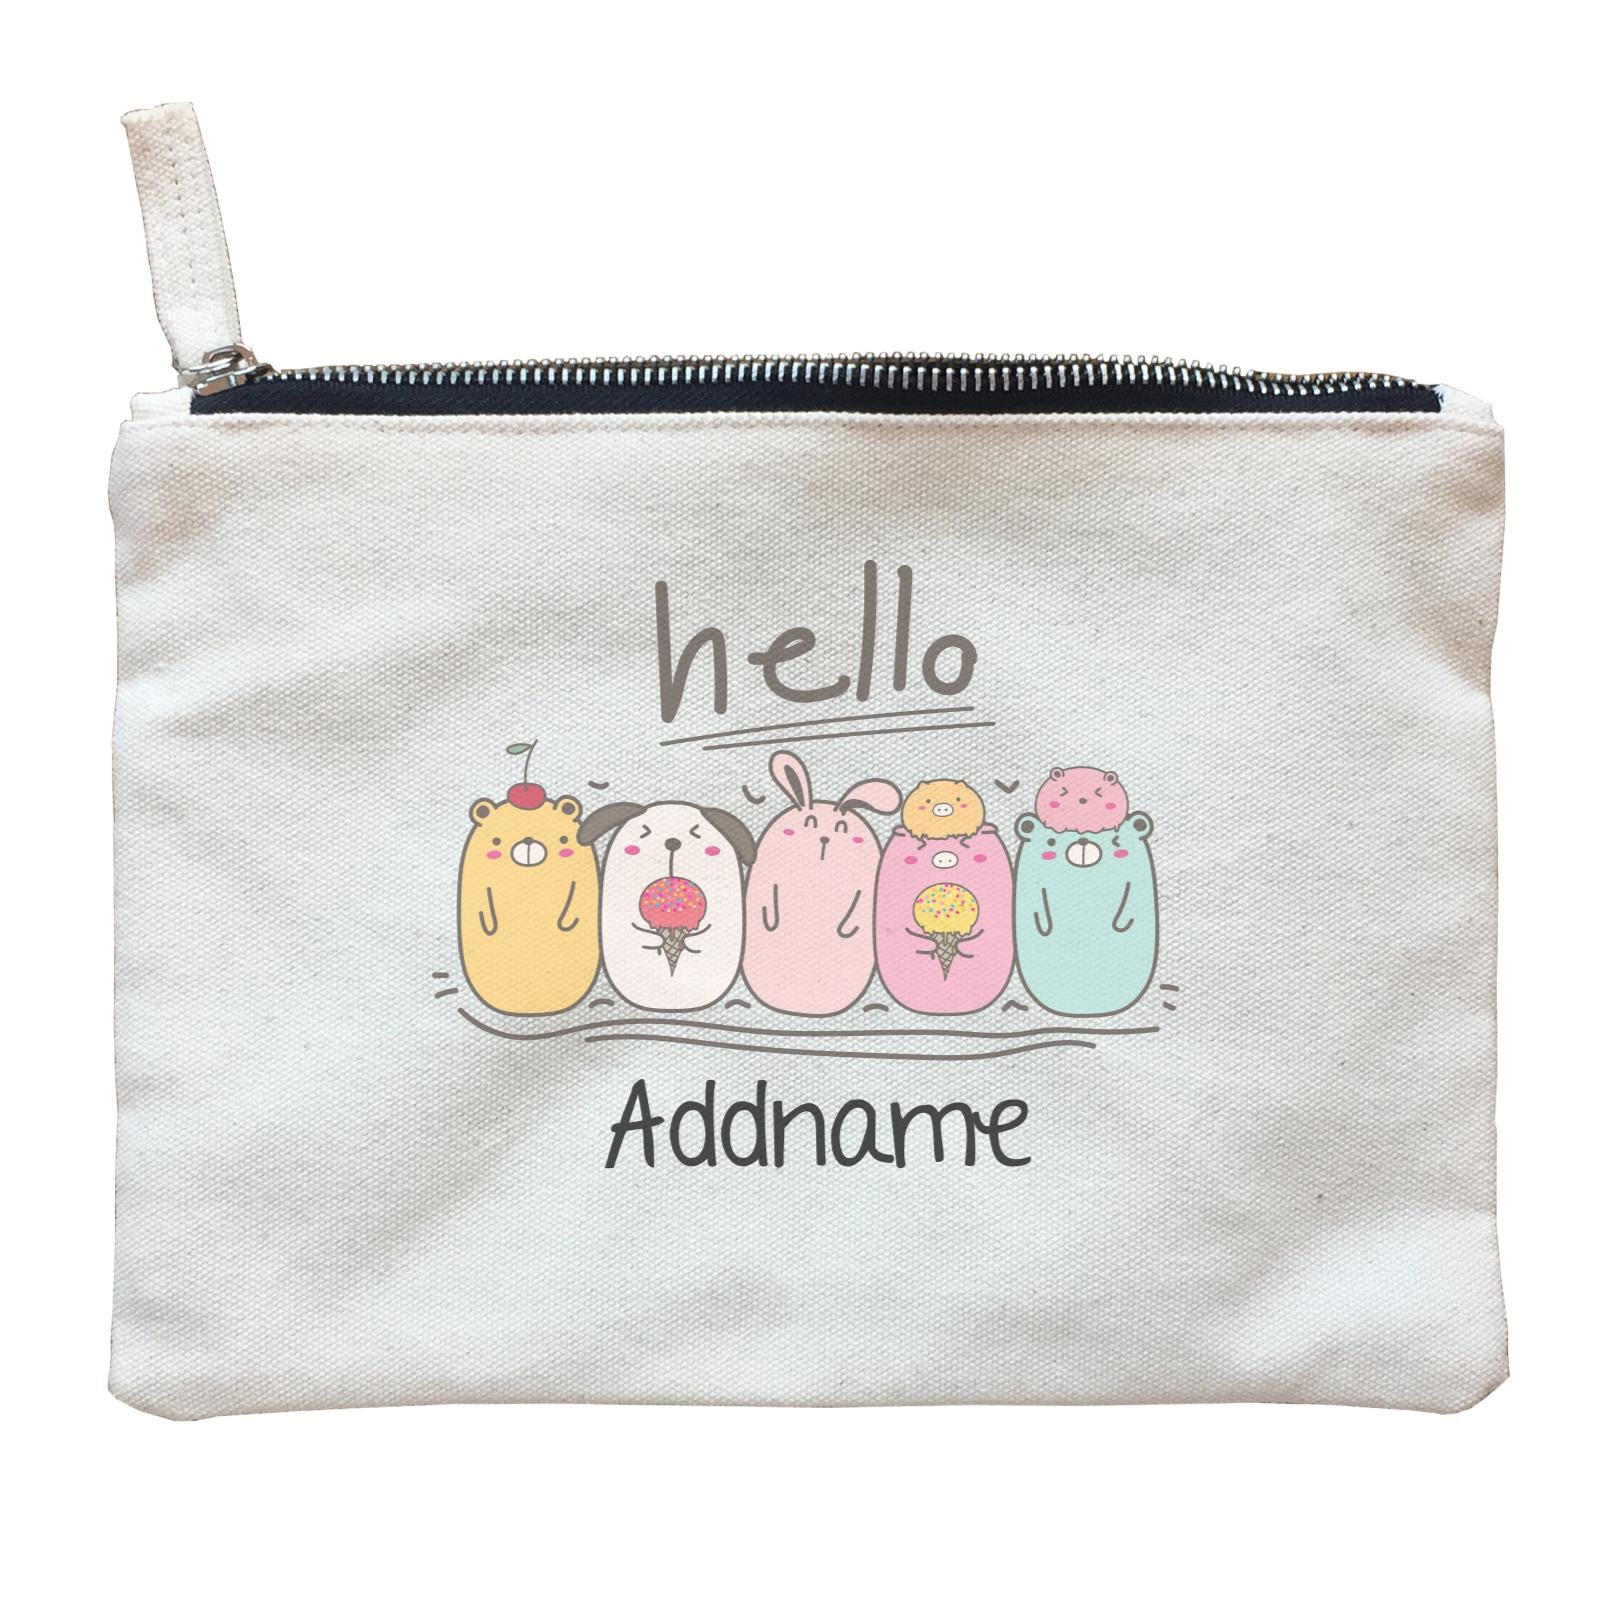 Cute Animals And Friends Series Cute Animals Ice Cream Group Addname Zipper Pouch